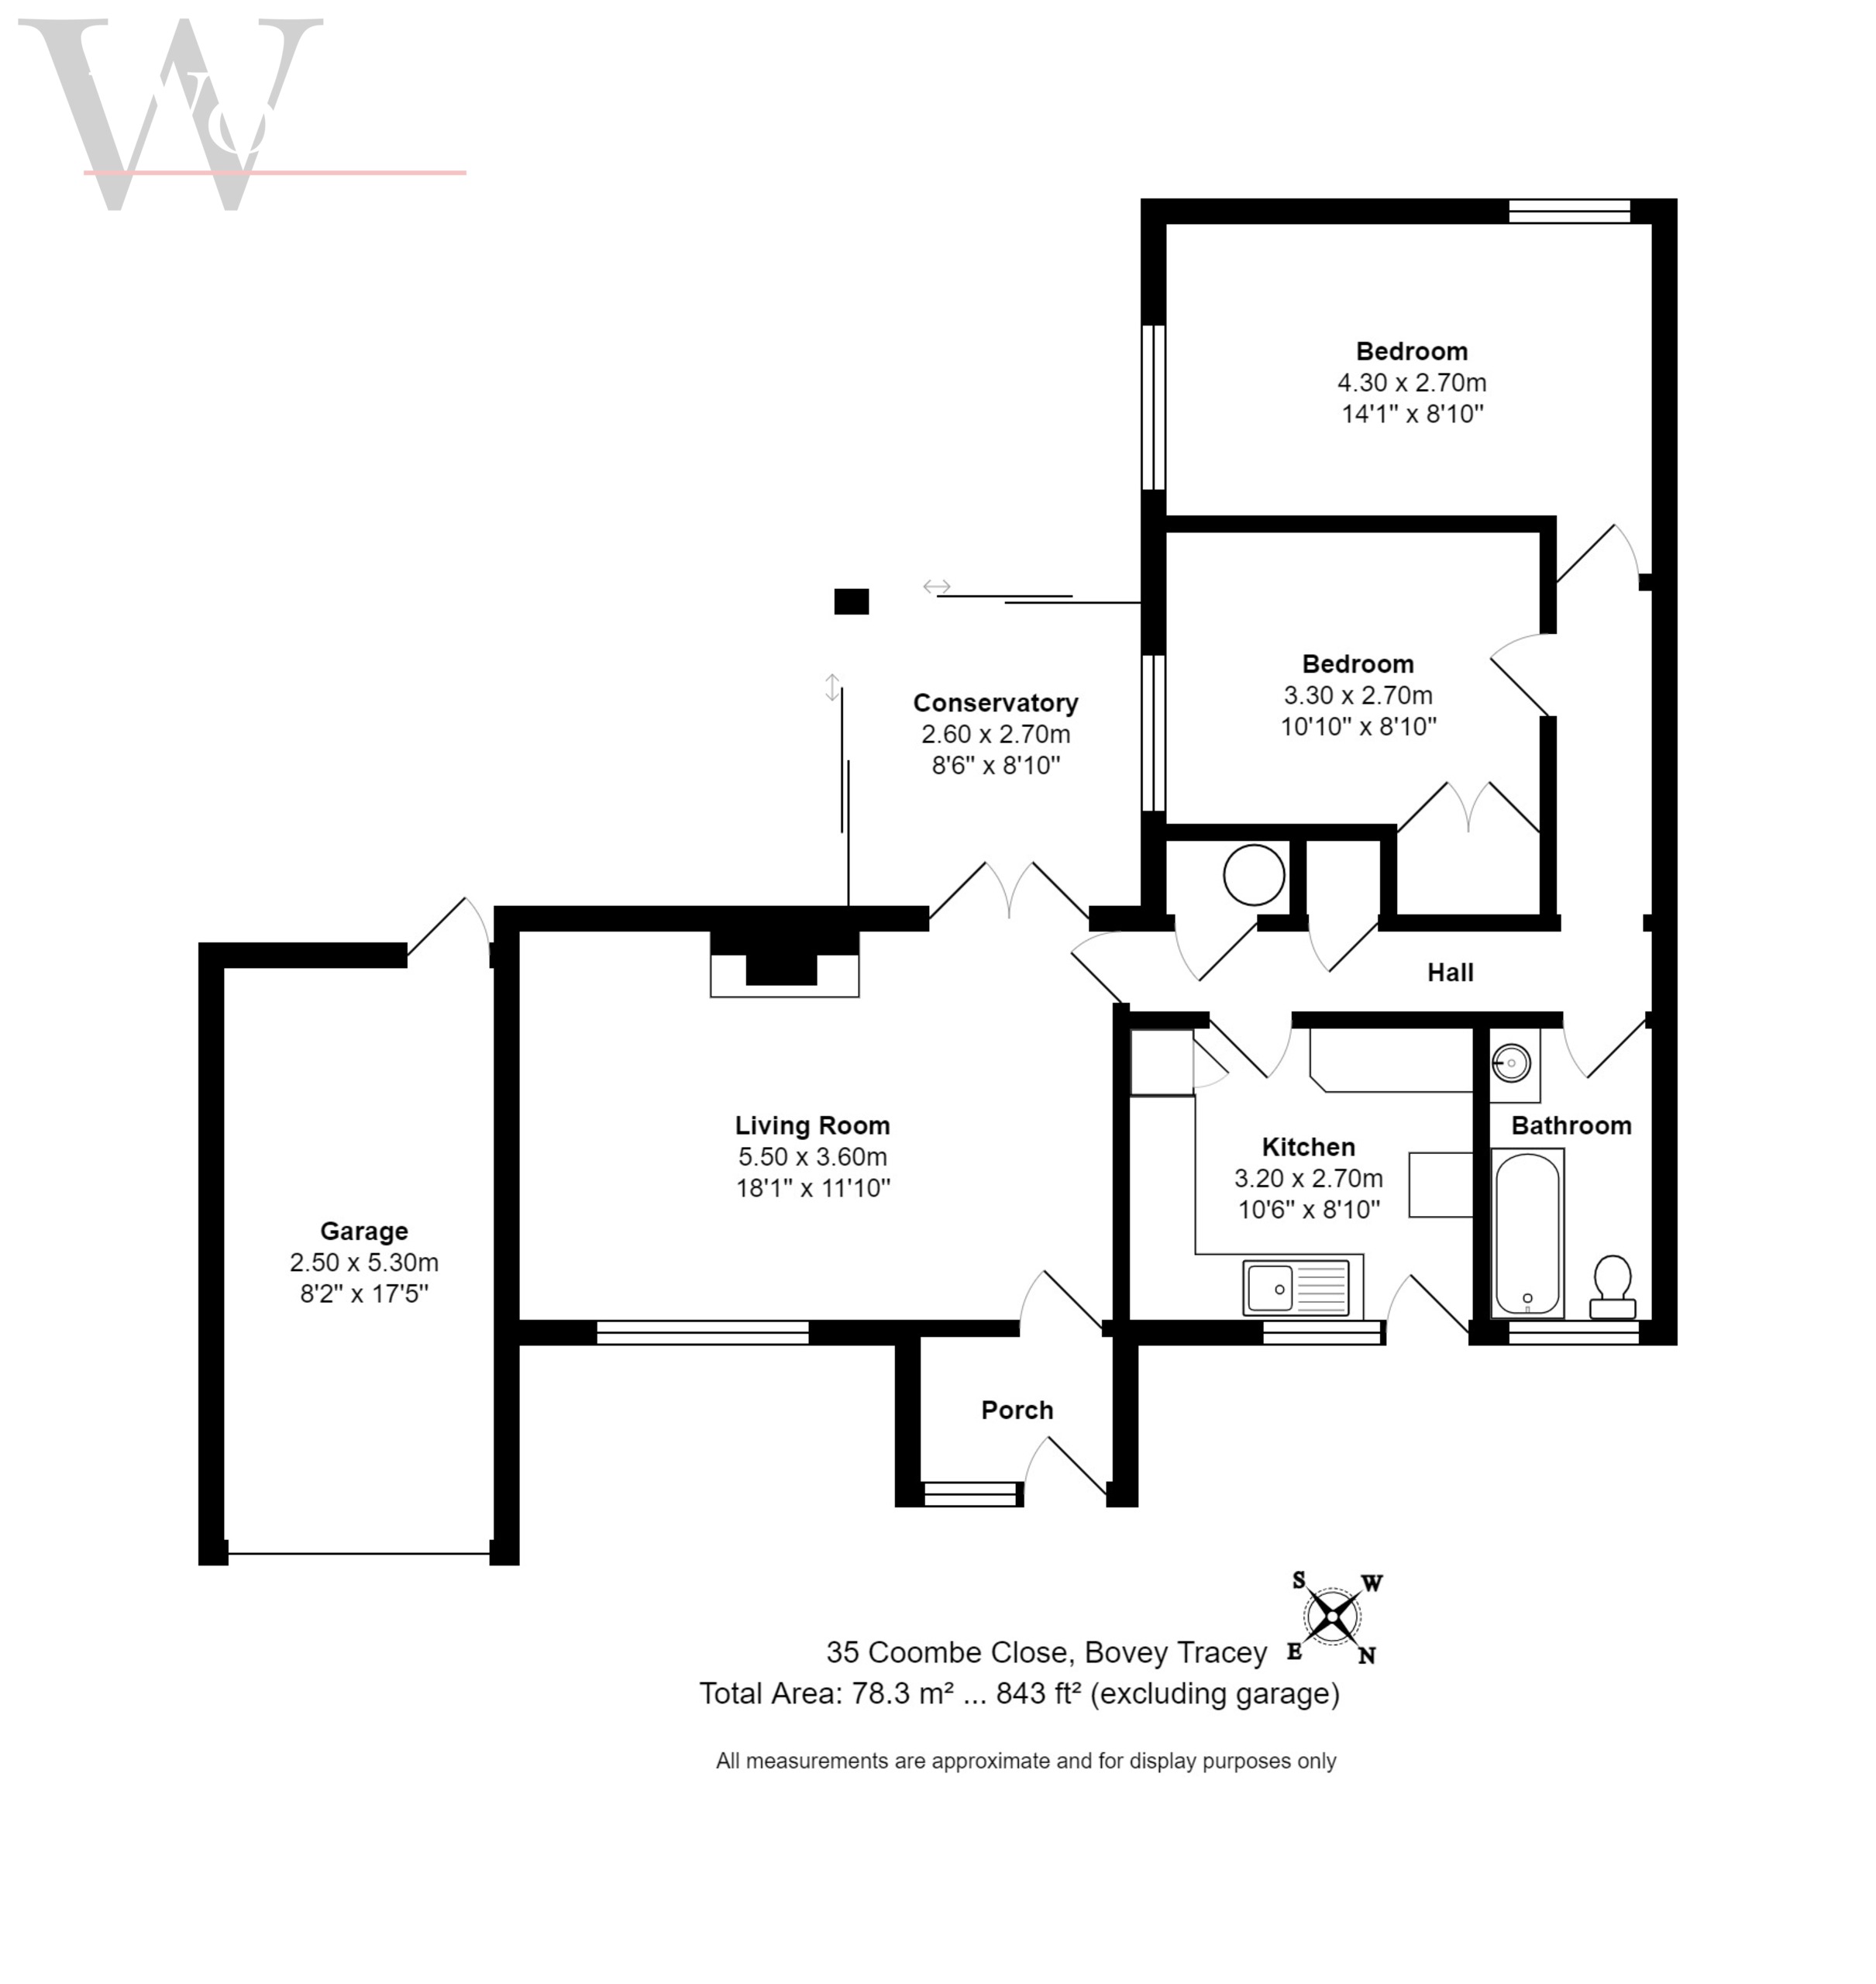 2 bed for sale in Bovey Tracey, Newton Abbot - Property floorplan